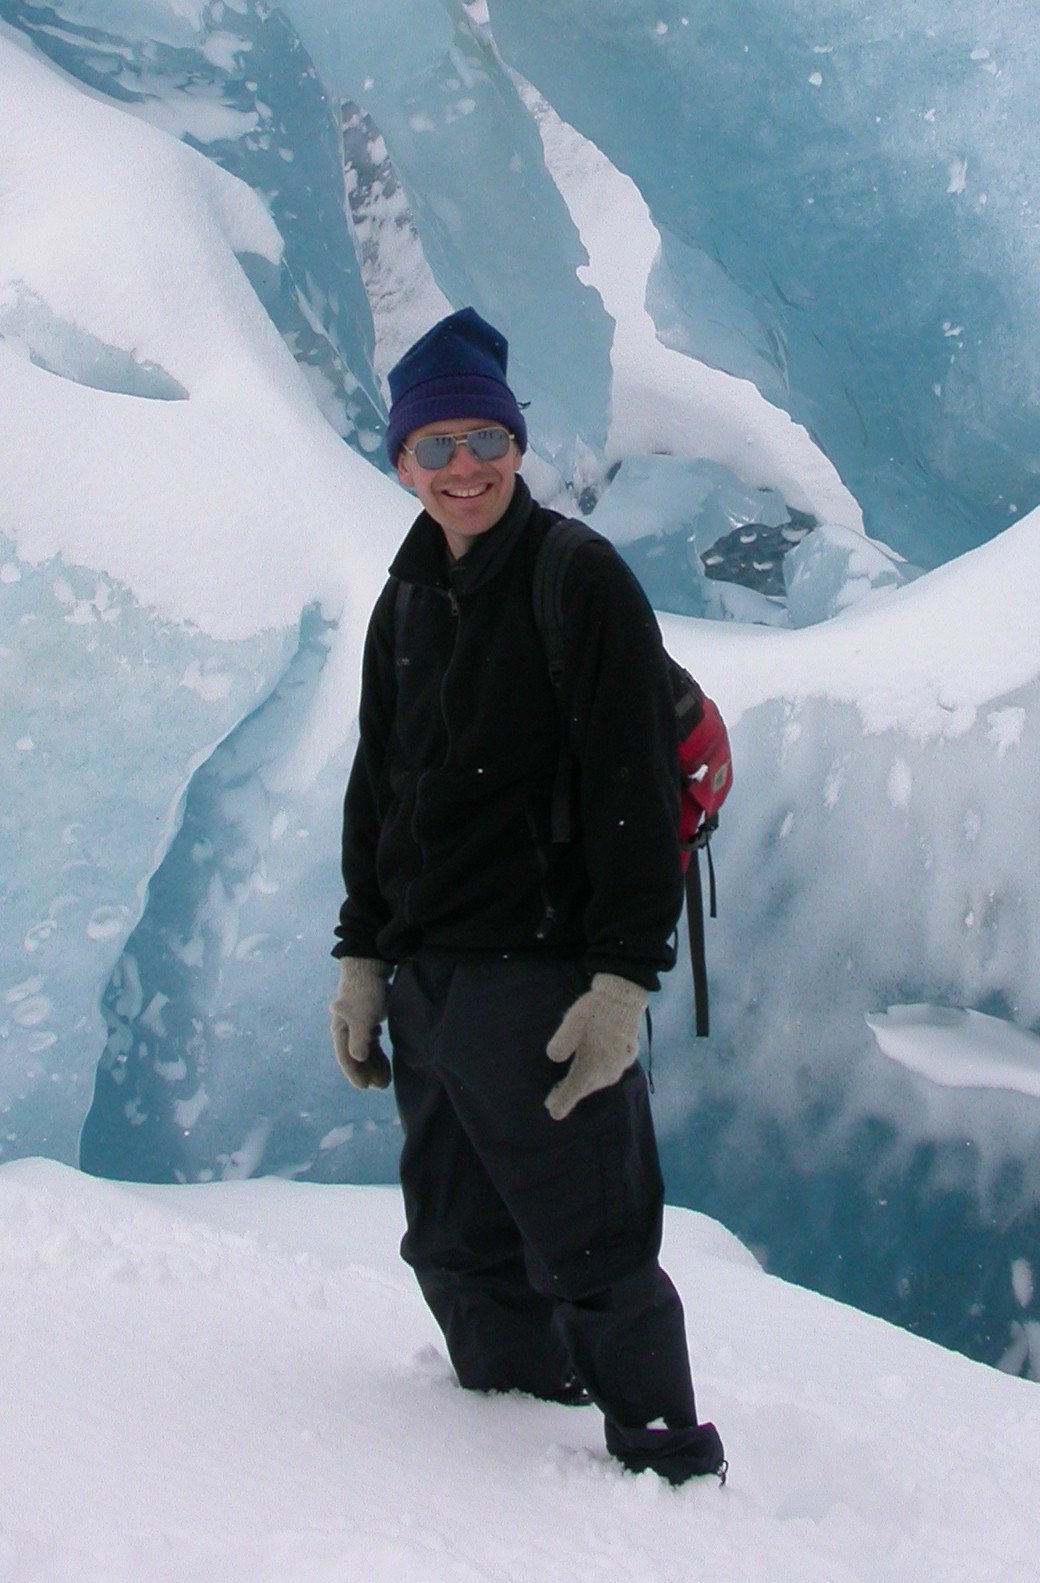 Neal Iverson, bundled in winter gear, stands in snow in front of a wall of ice.